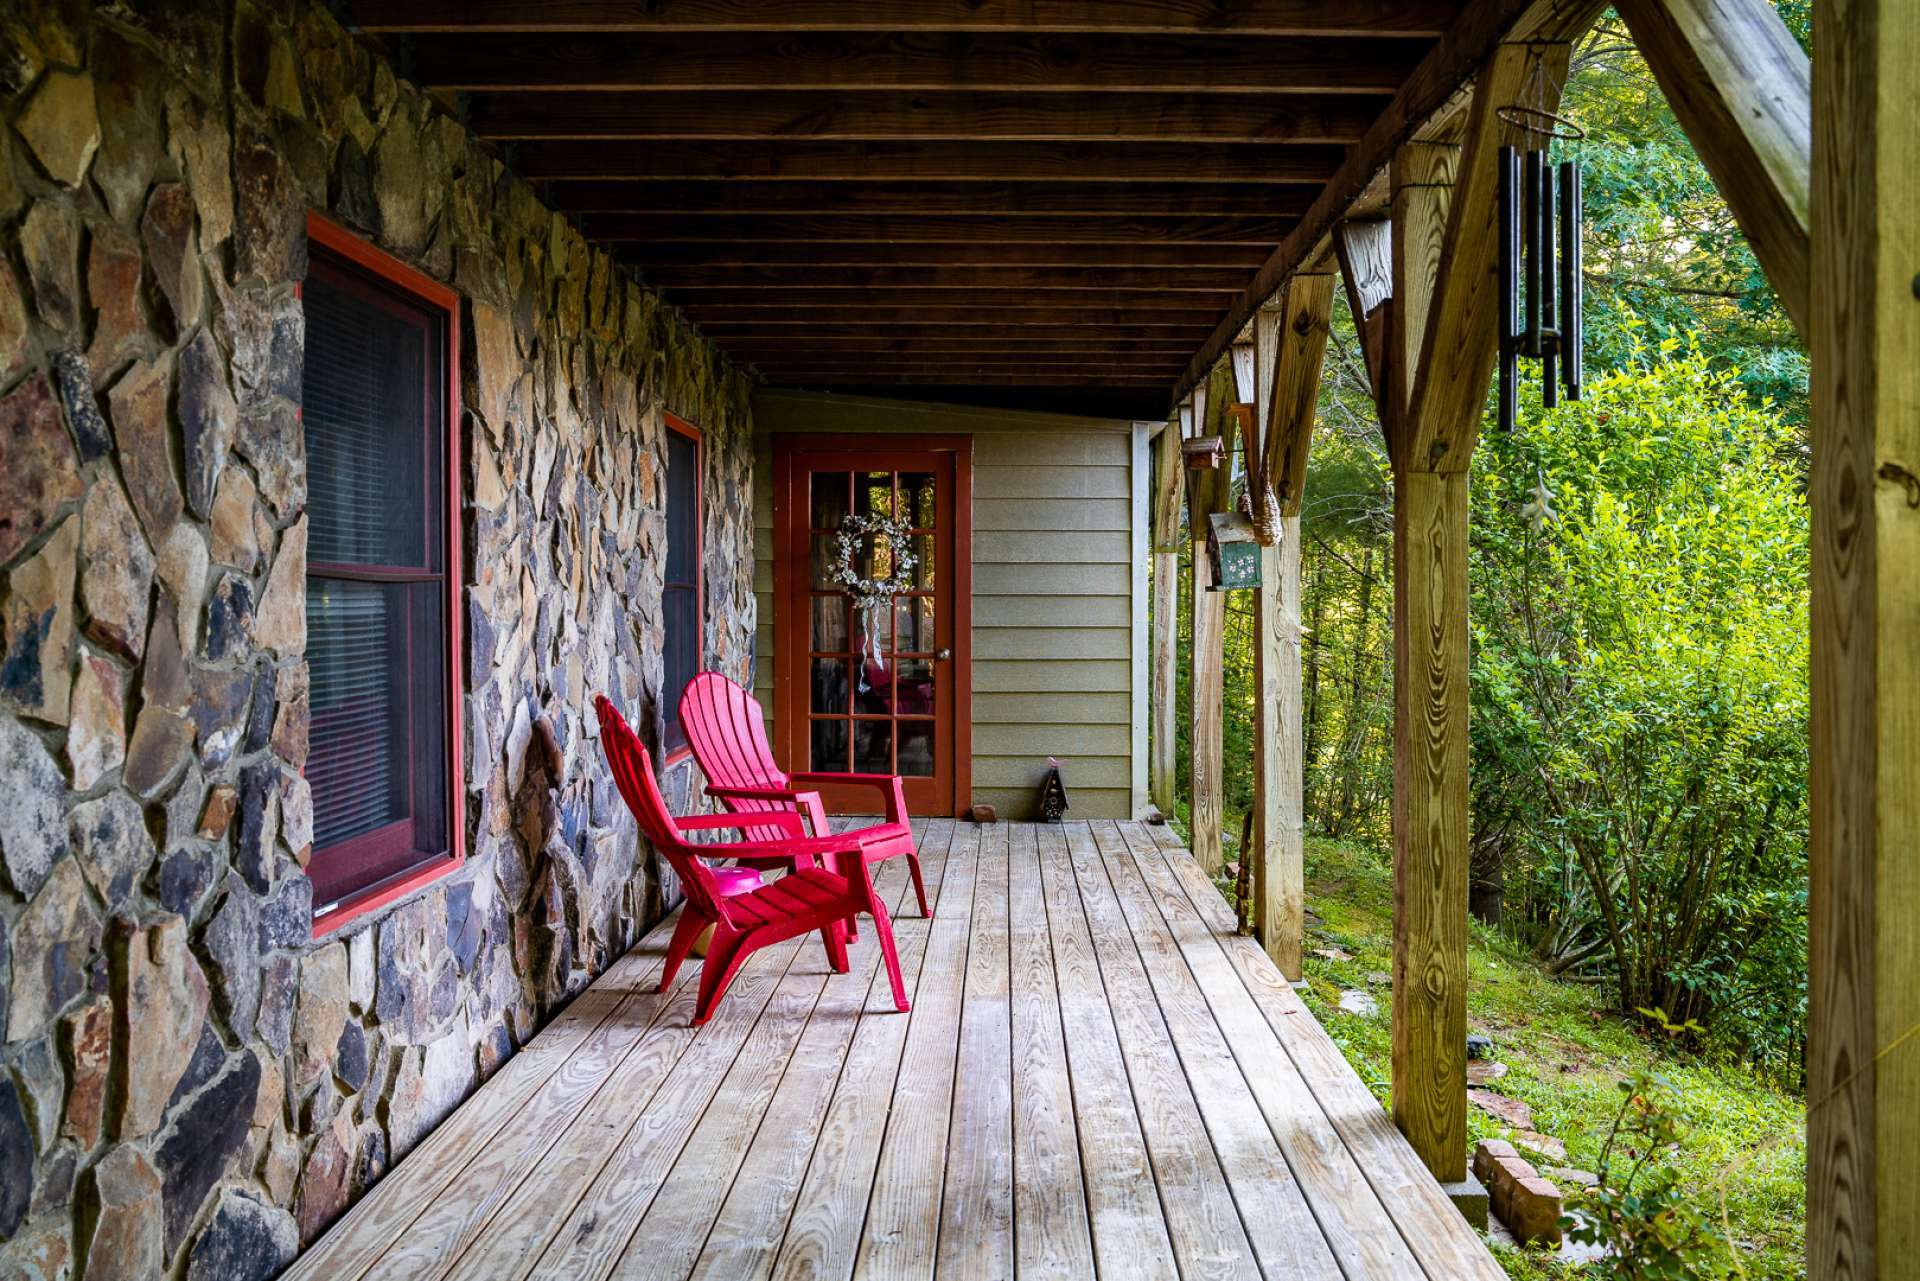 The covered lower deck is another space for enjoying the outdoors.